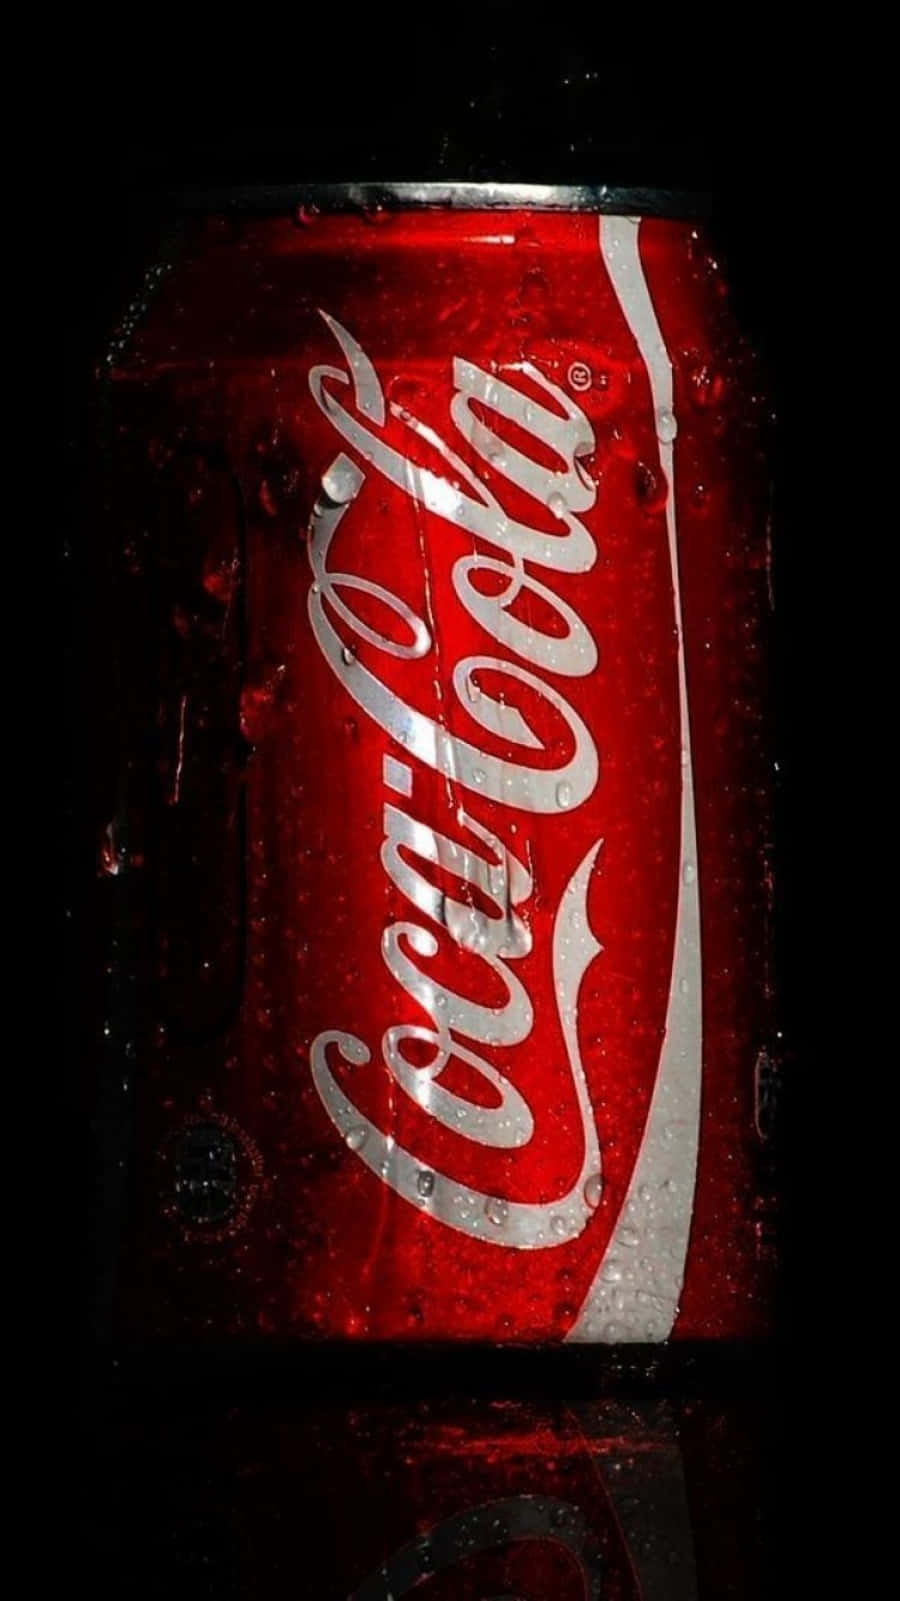 Chilled Coca-Cola bottle with a vibrant red logo on a classy black background